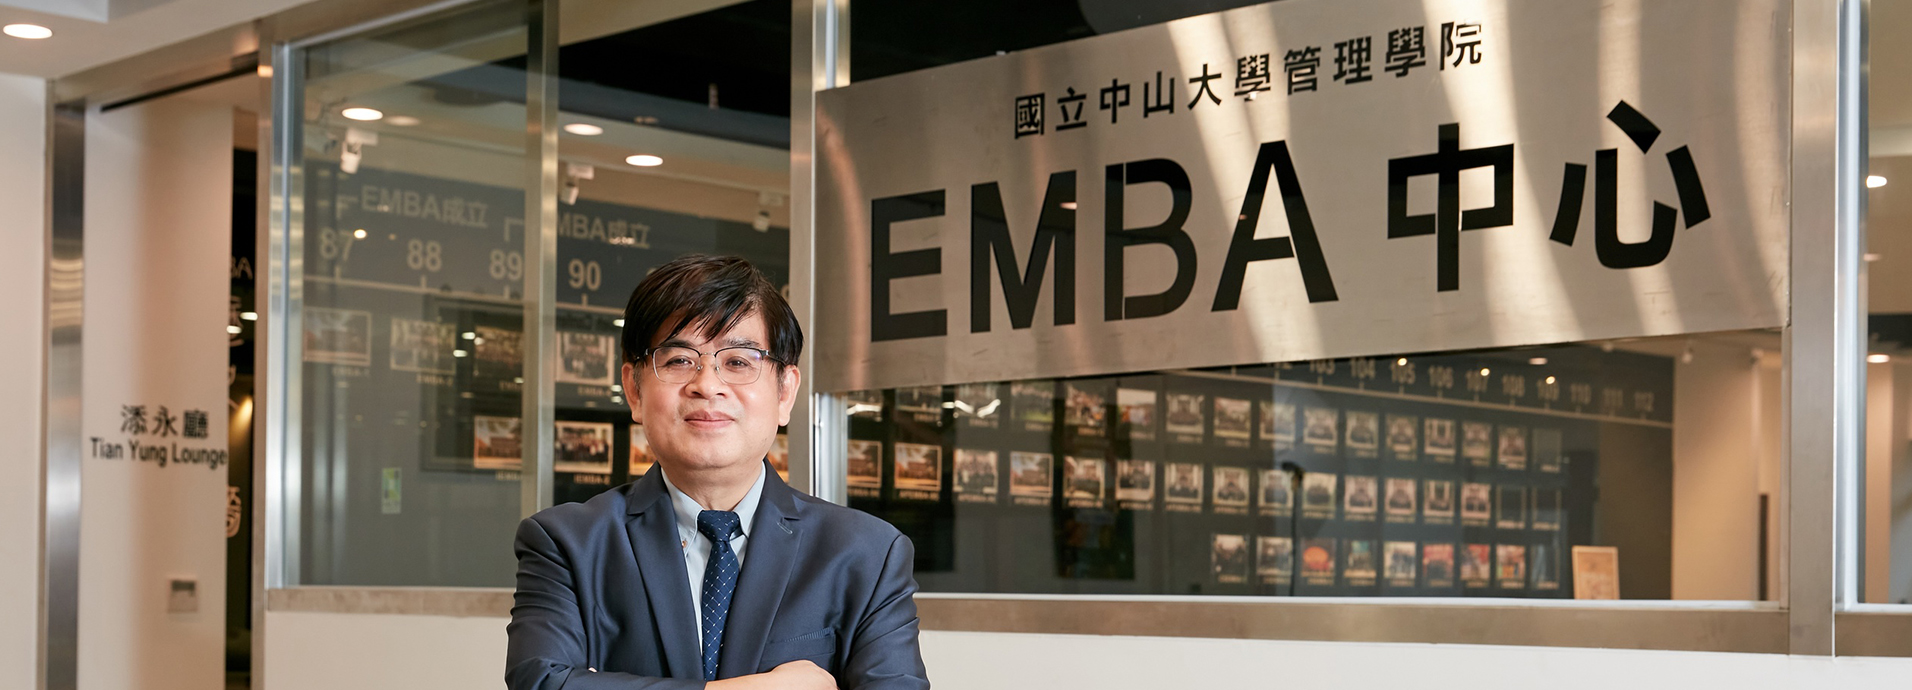 Collage of Management EMBA cultivates new leaders of enterprises in the new century